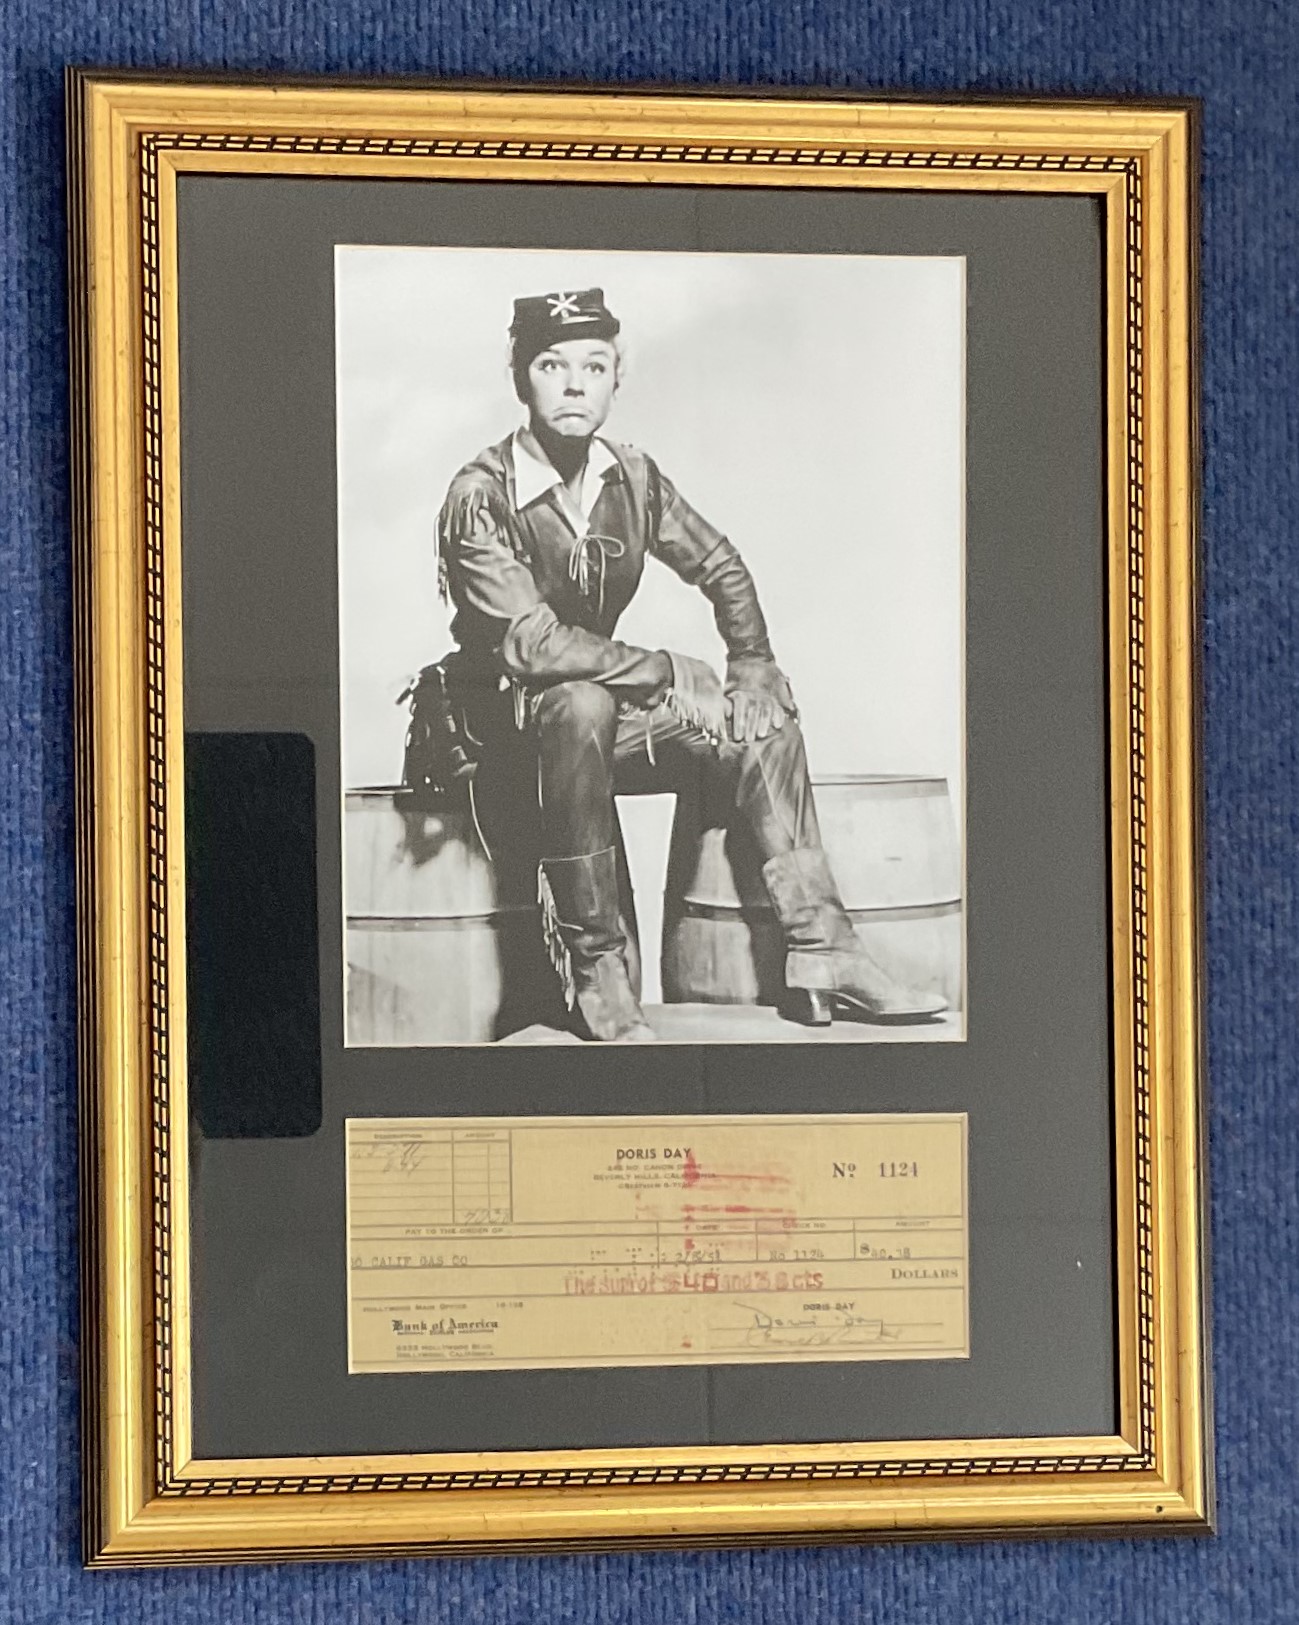 Doris Day 18x14 inch overall mounted and framed signed cheque and vintage Calamity Jane black and